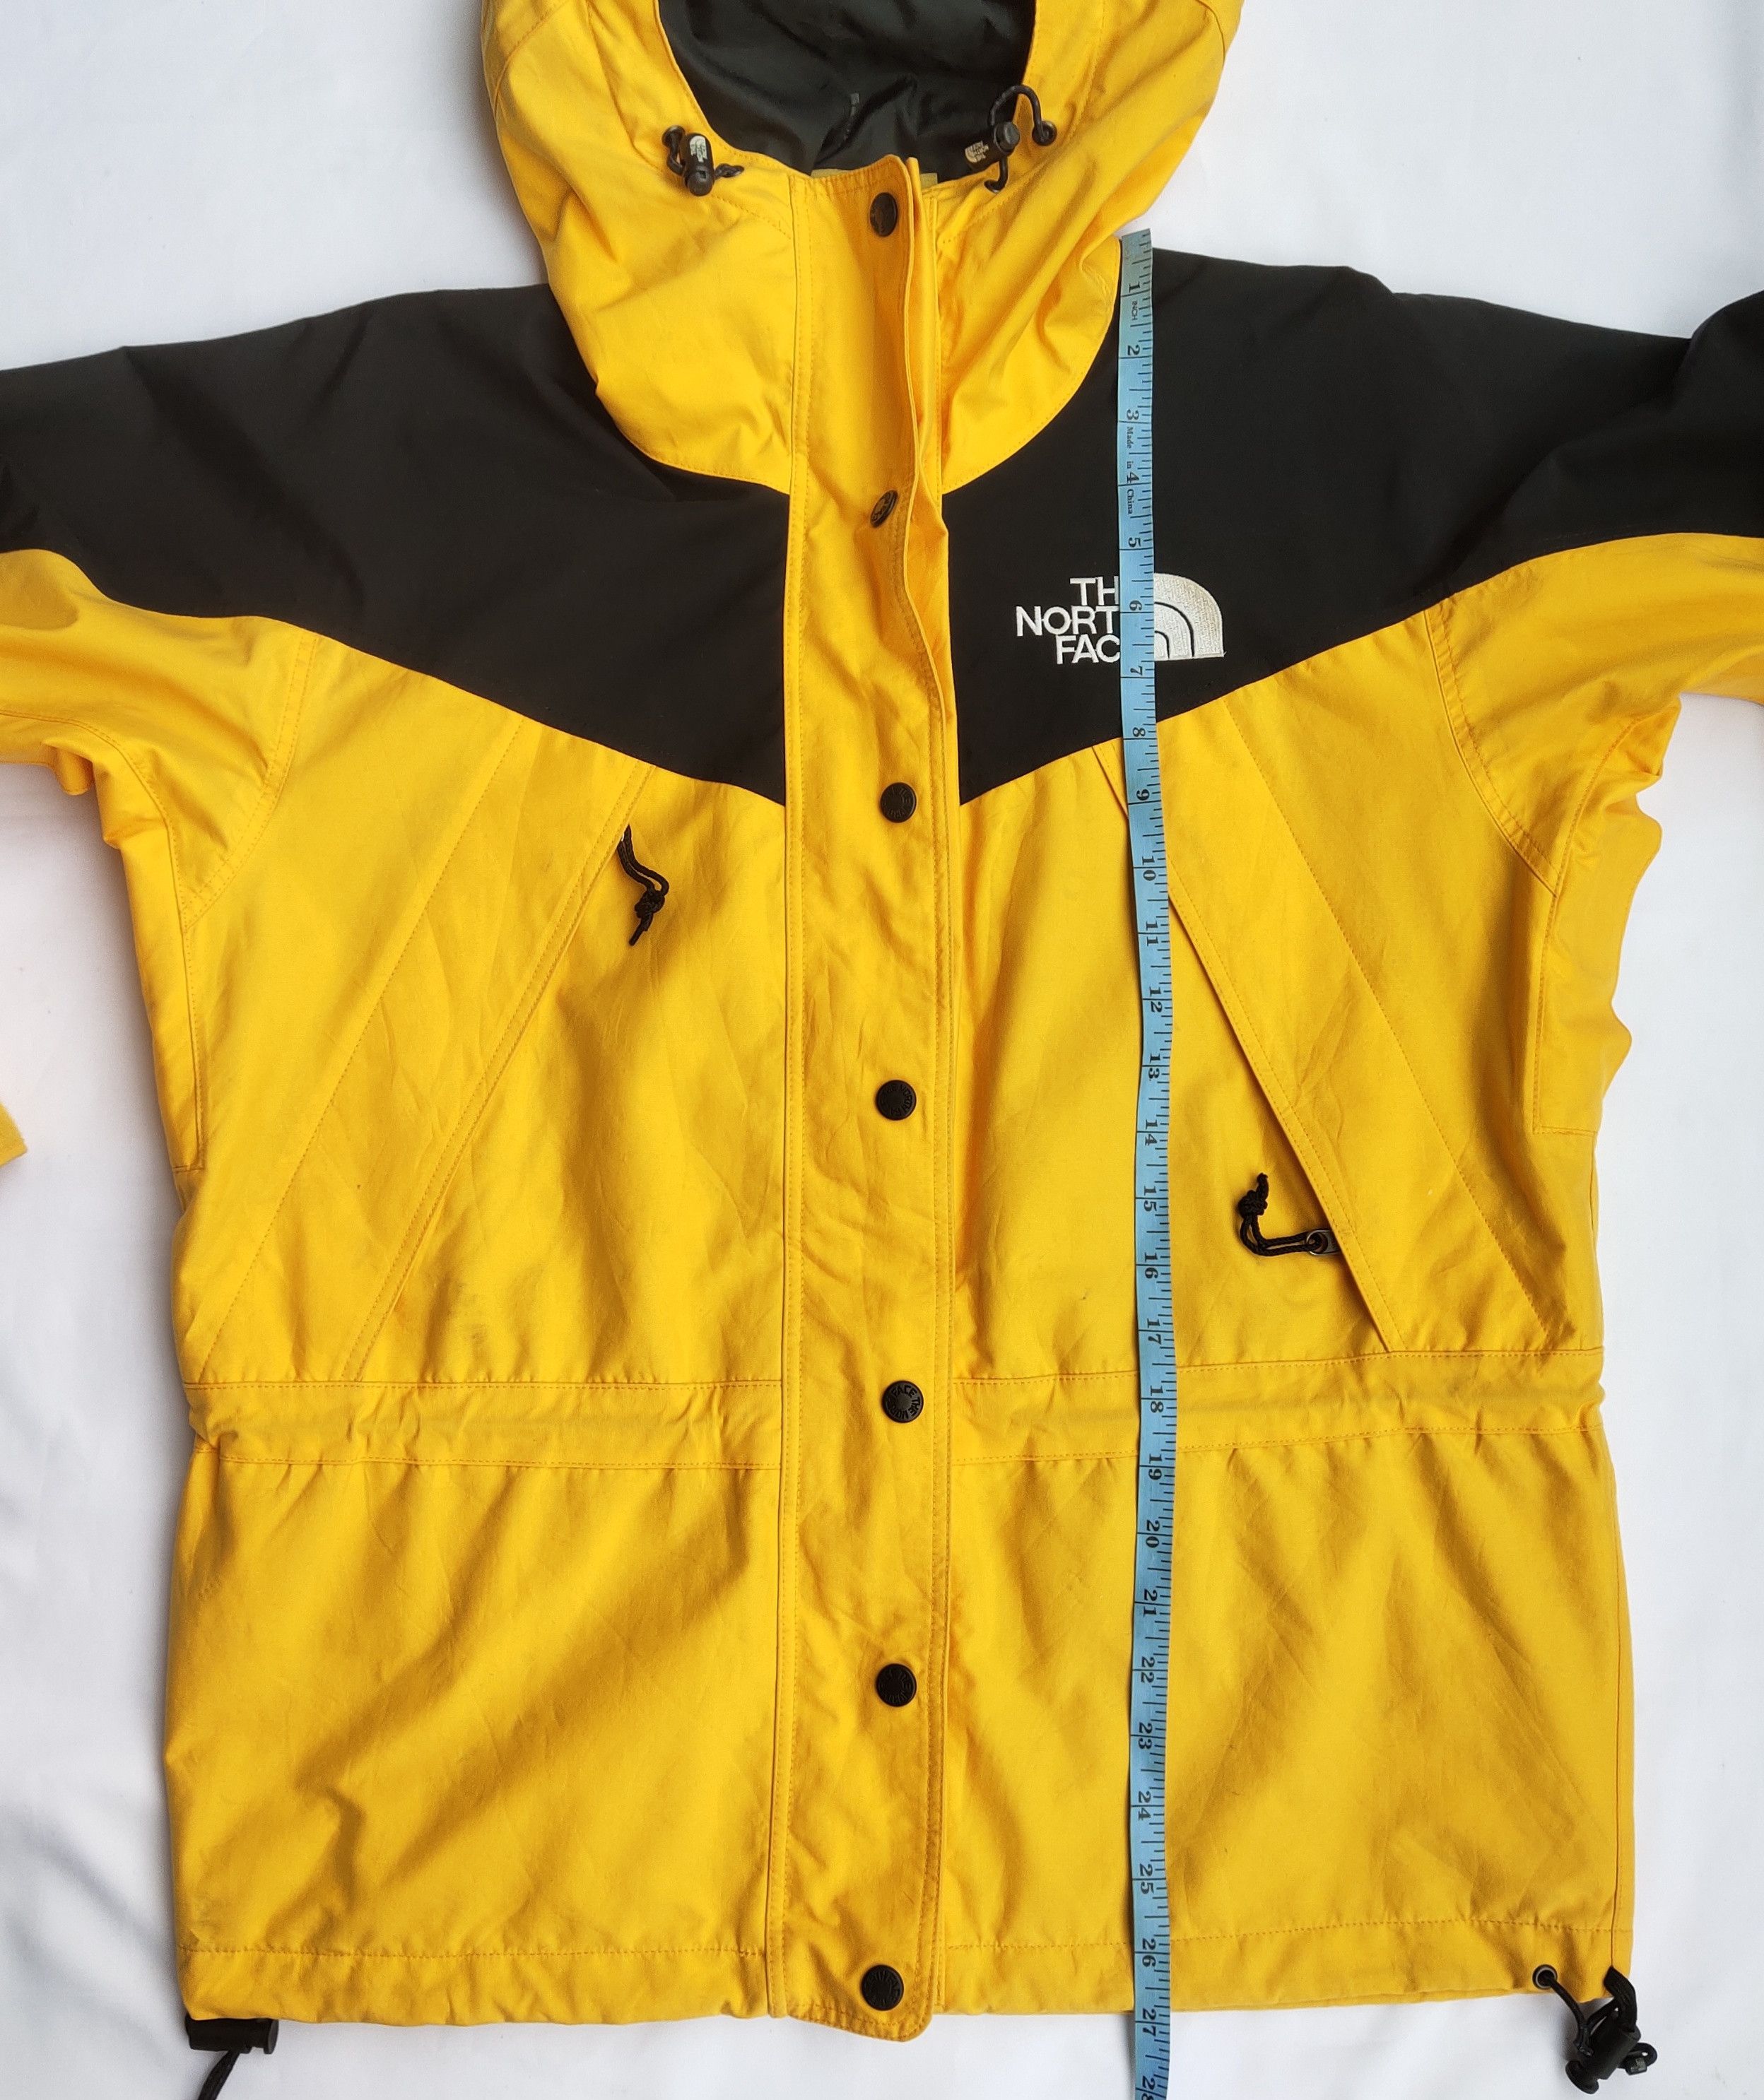 The North Face Vintage North Face Gore-Tex Yellow Jacket Size US M / EU 48-50 / 2 - 10 Thumbnail